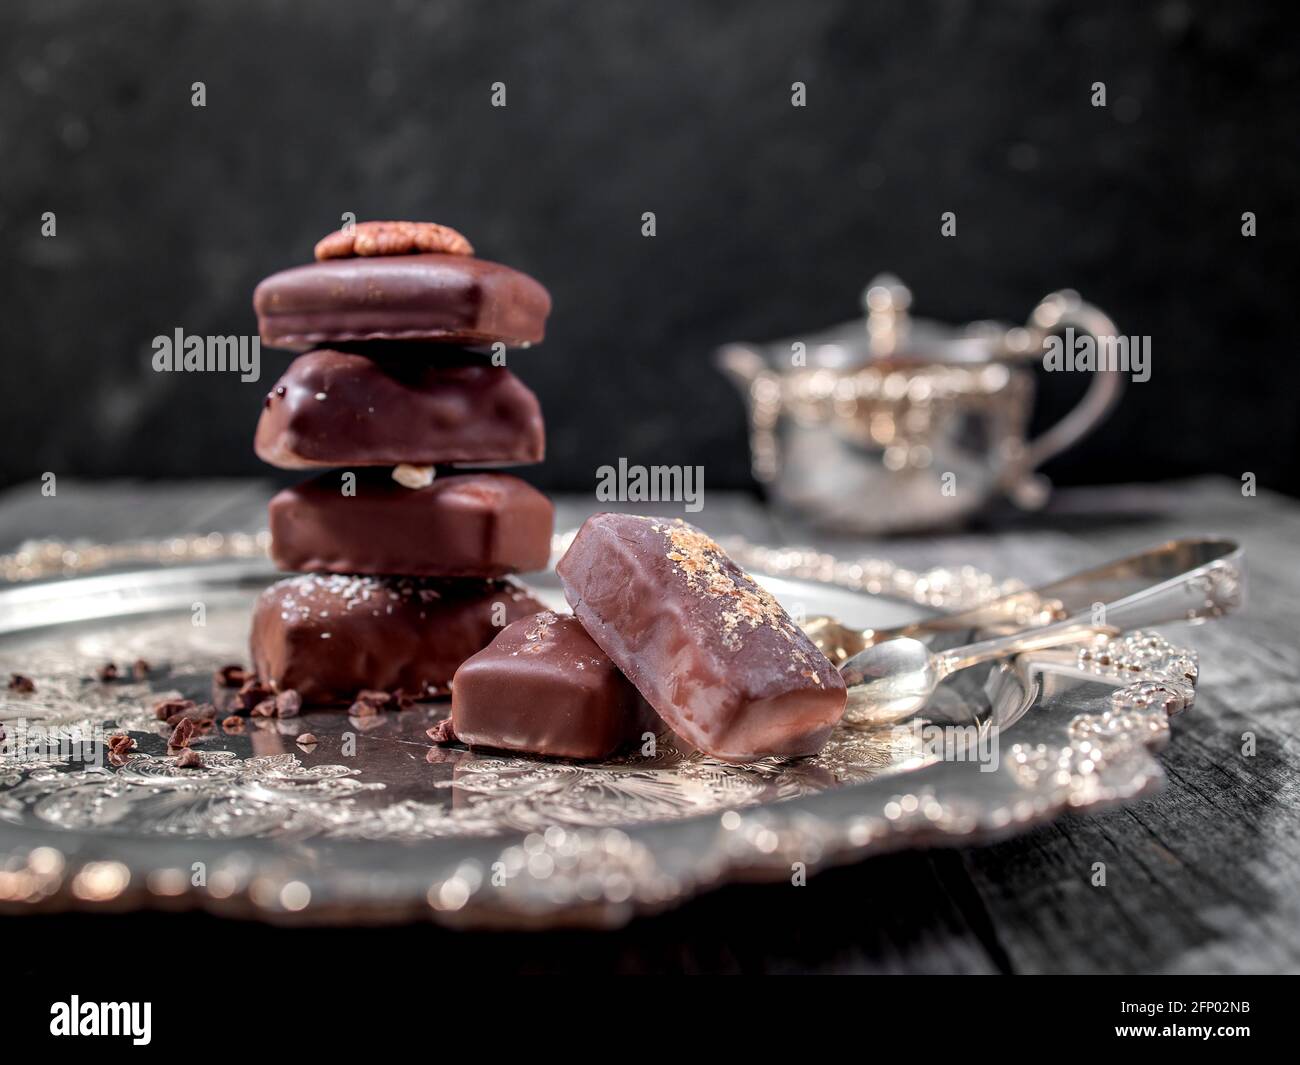 Dark handmade chocolate stack with cacao chips and nuts Stock Photo